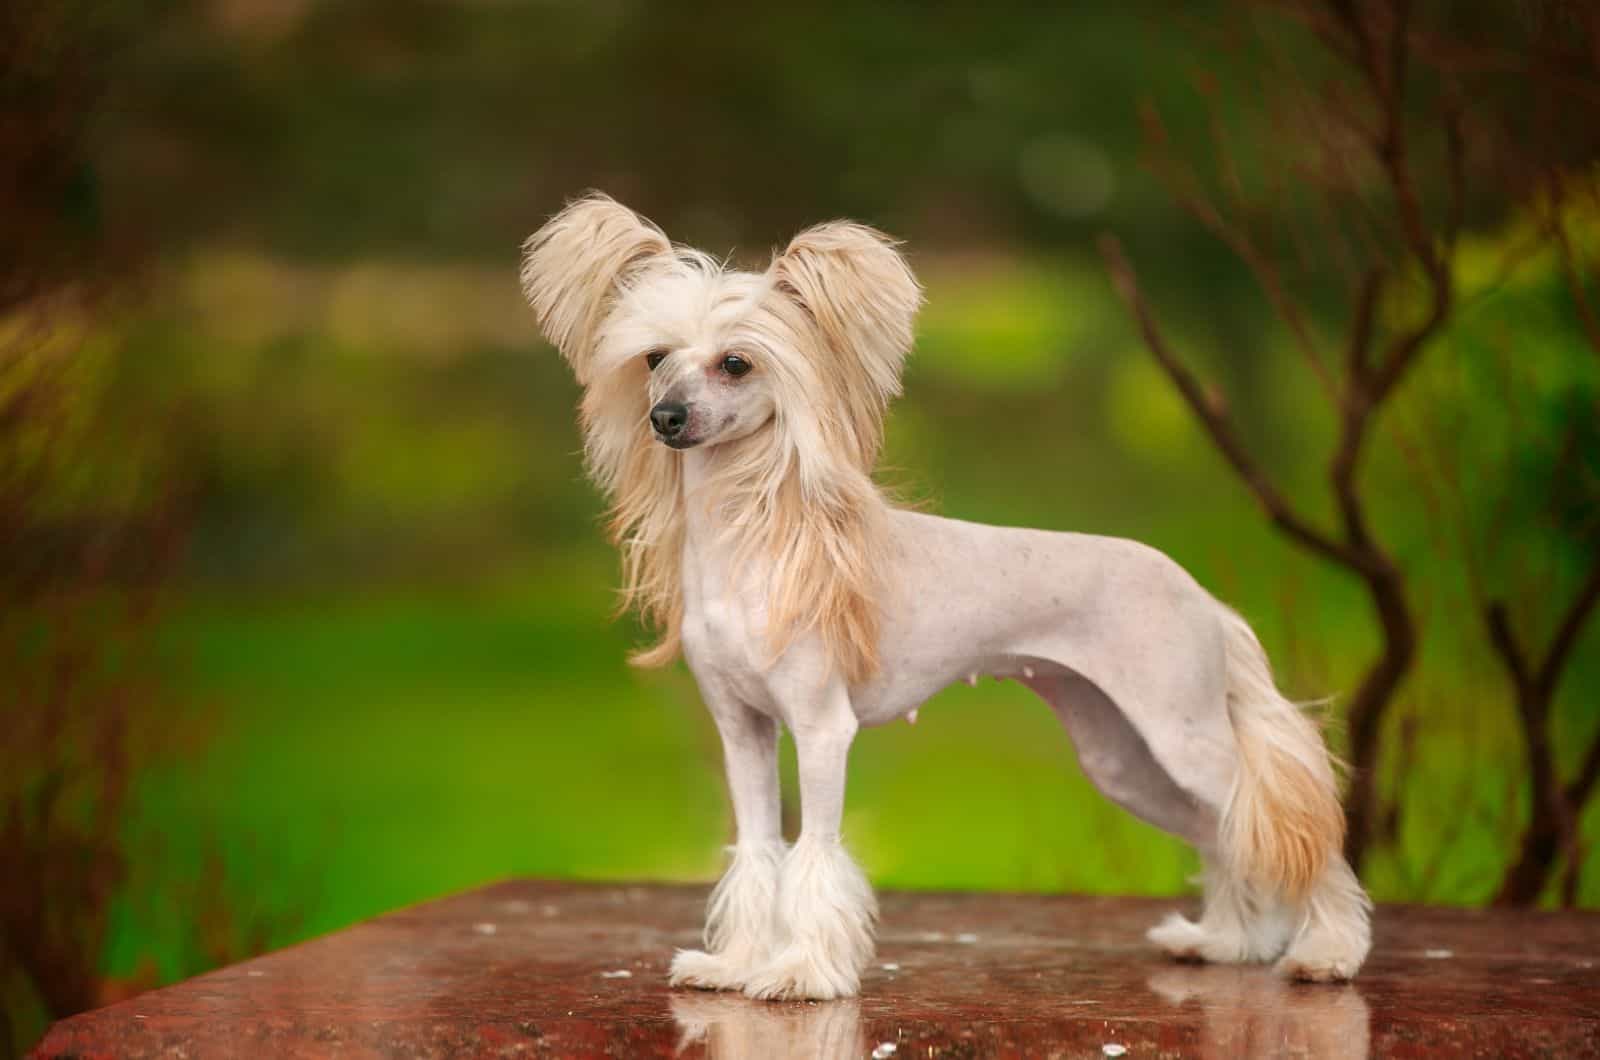 Chinese Crested dog standing on table